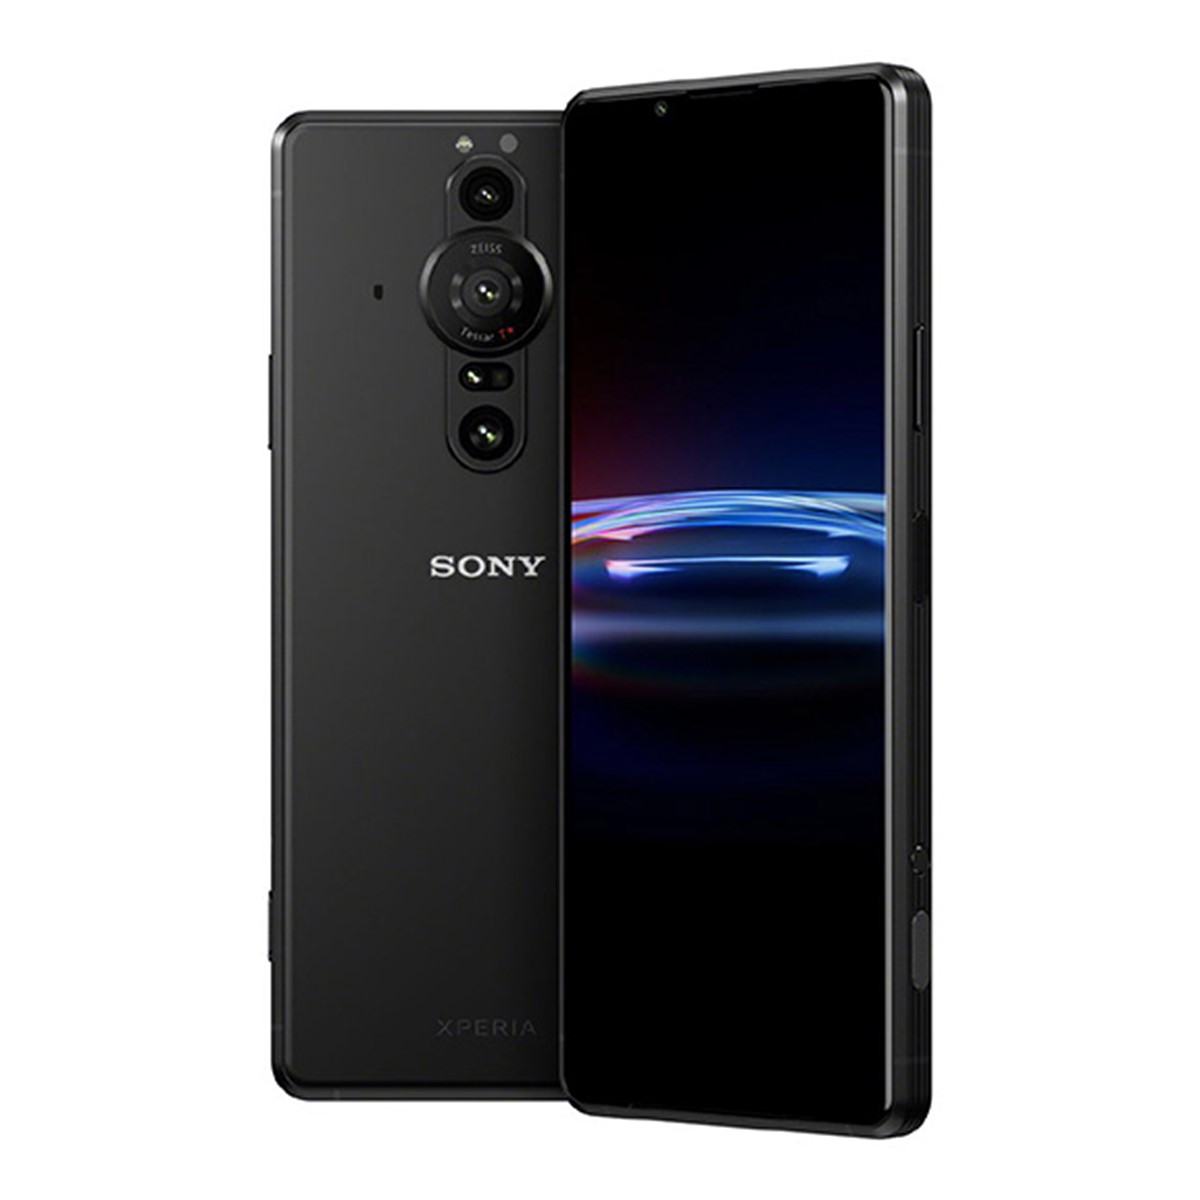 In-camera authenticity technology will be pre-installed on the Sony Xperia 1 VI at launch